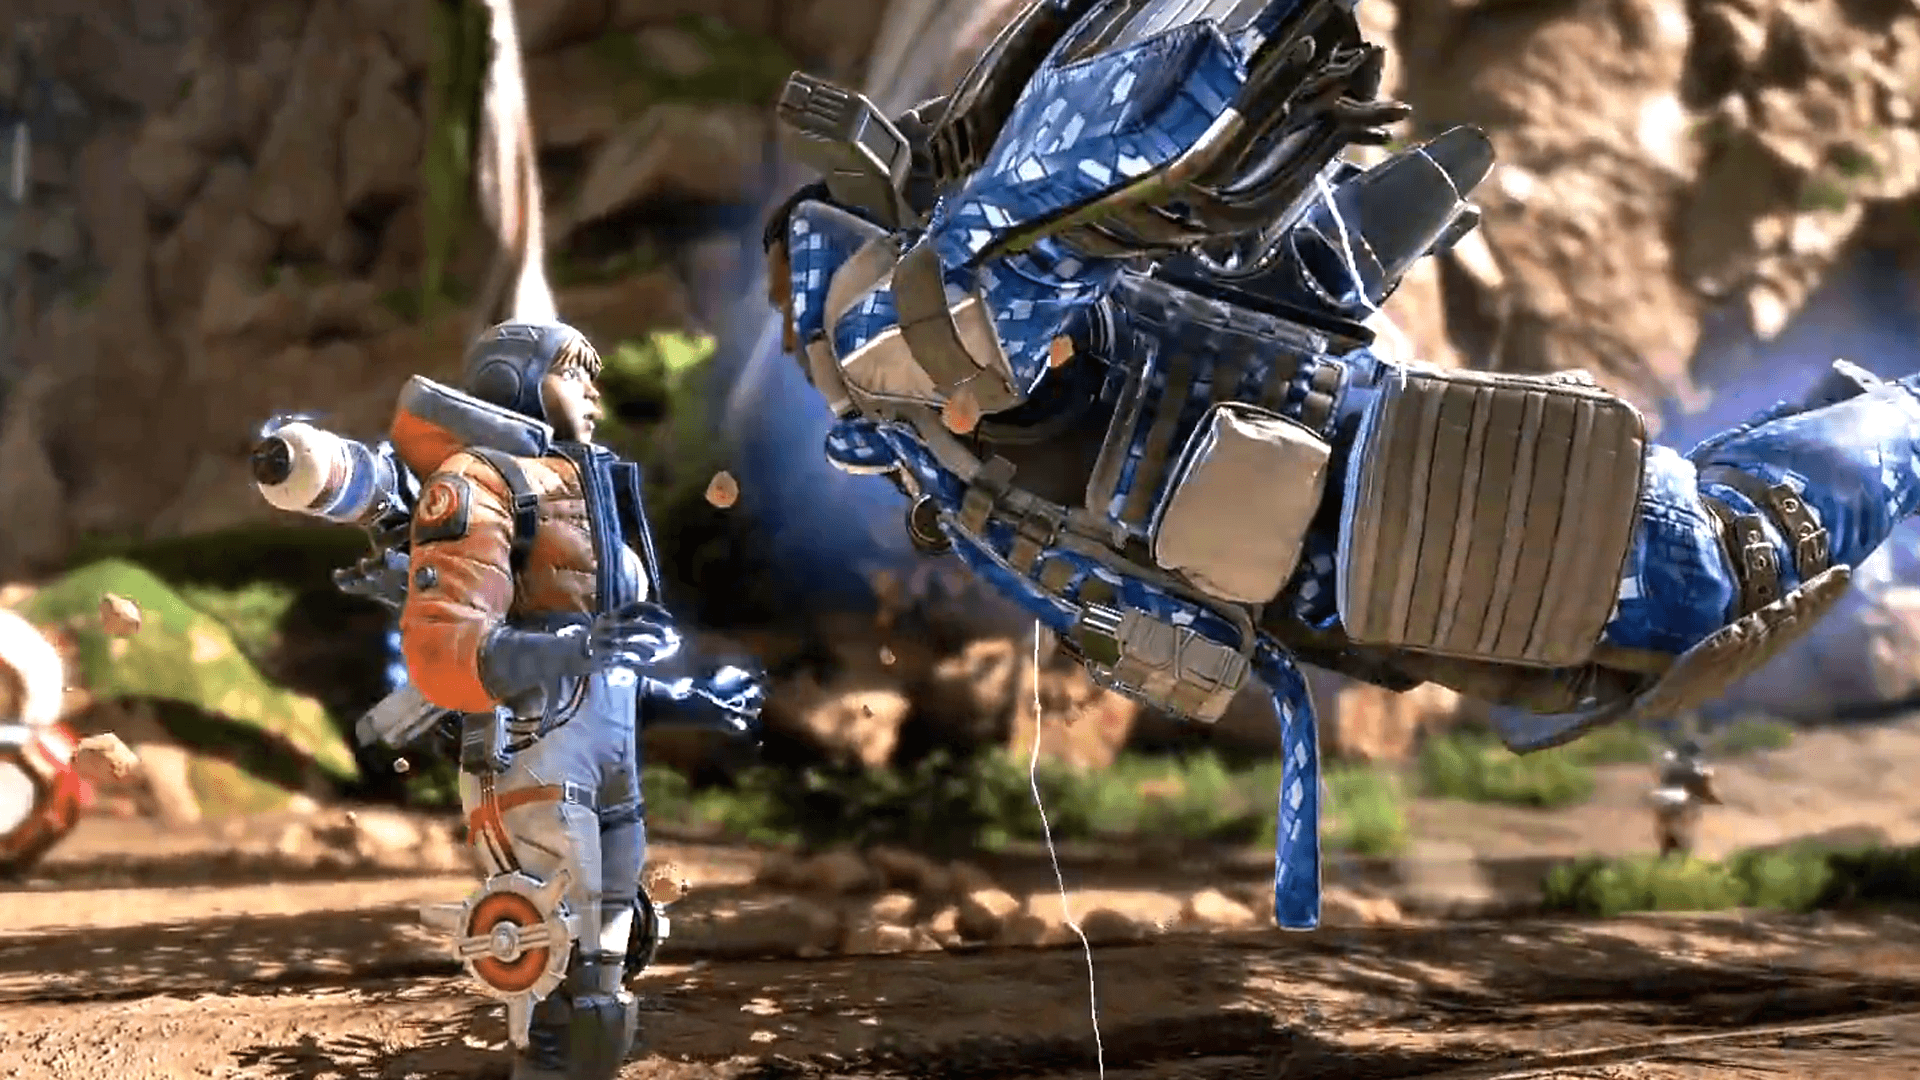 Apex Legends introduces us to Wattson and her abilities